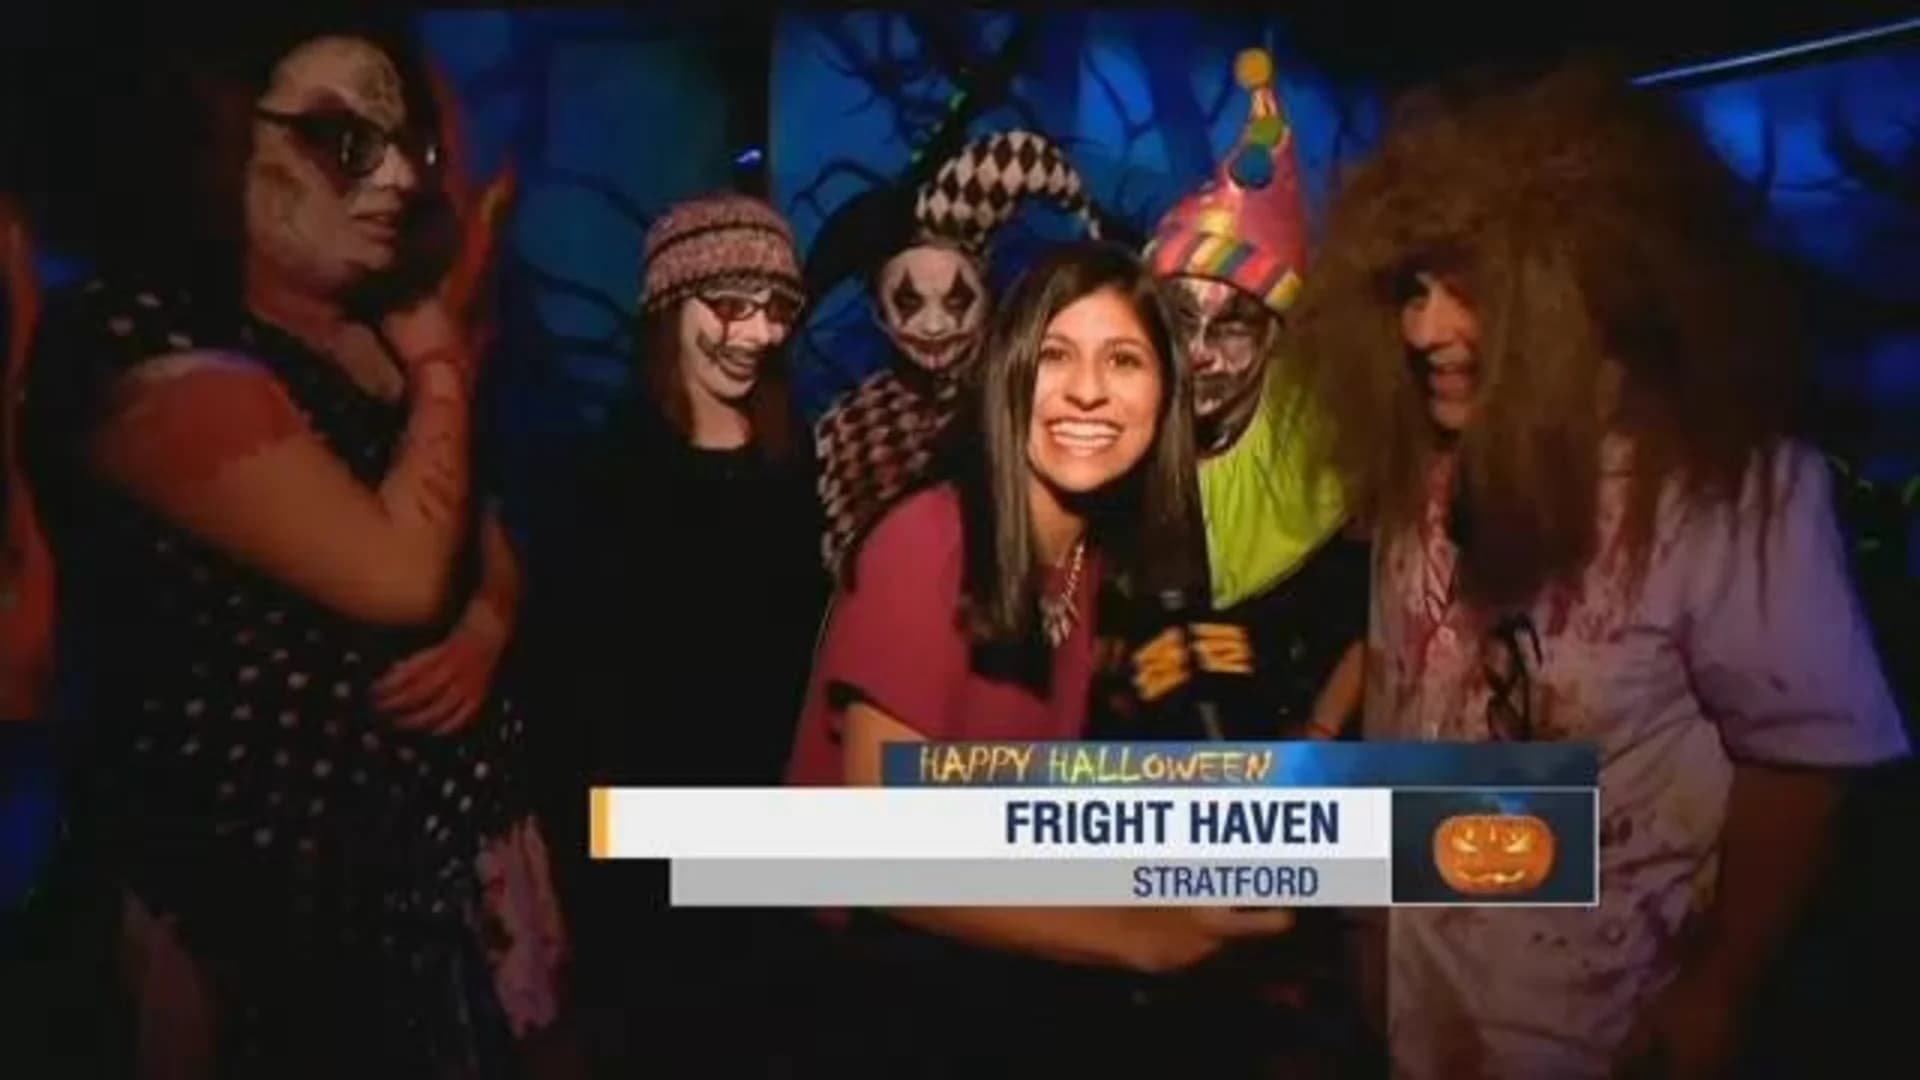 Fright Haven celebrates 3 terrifying years in Stratford